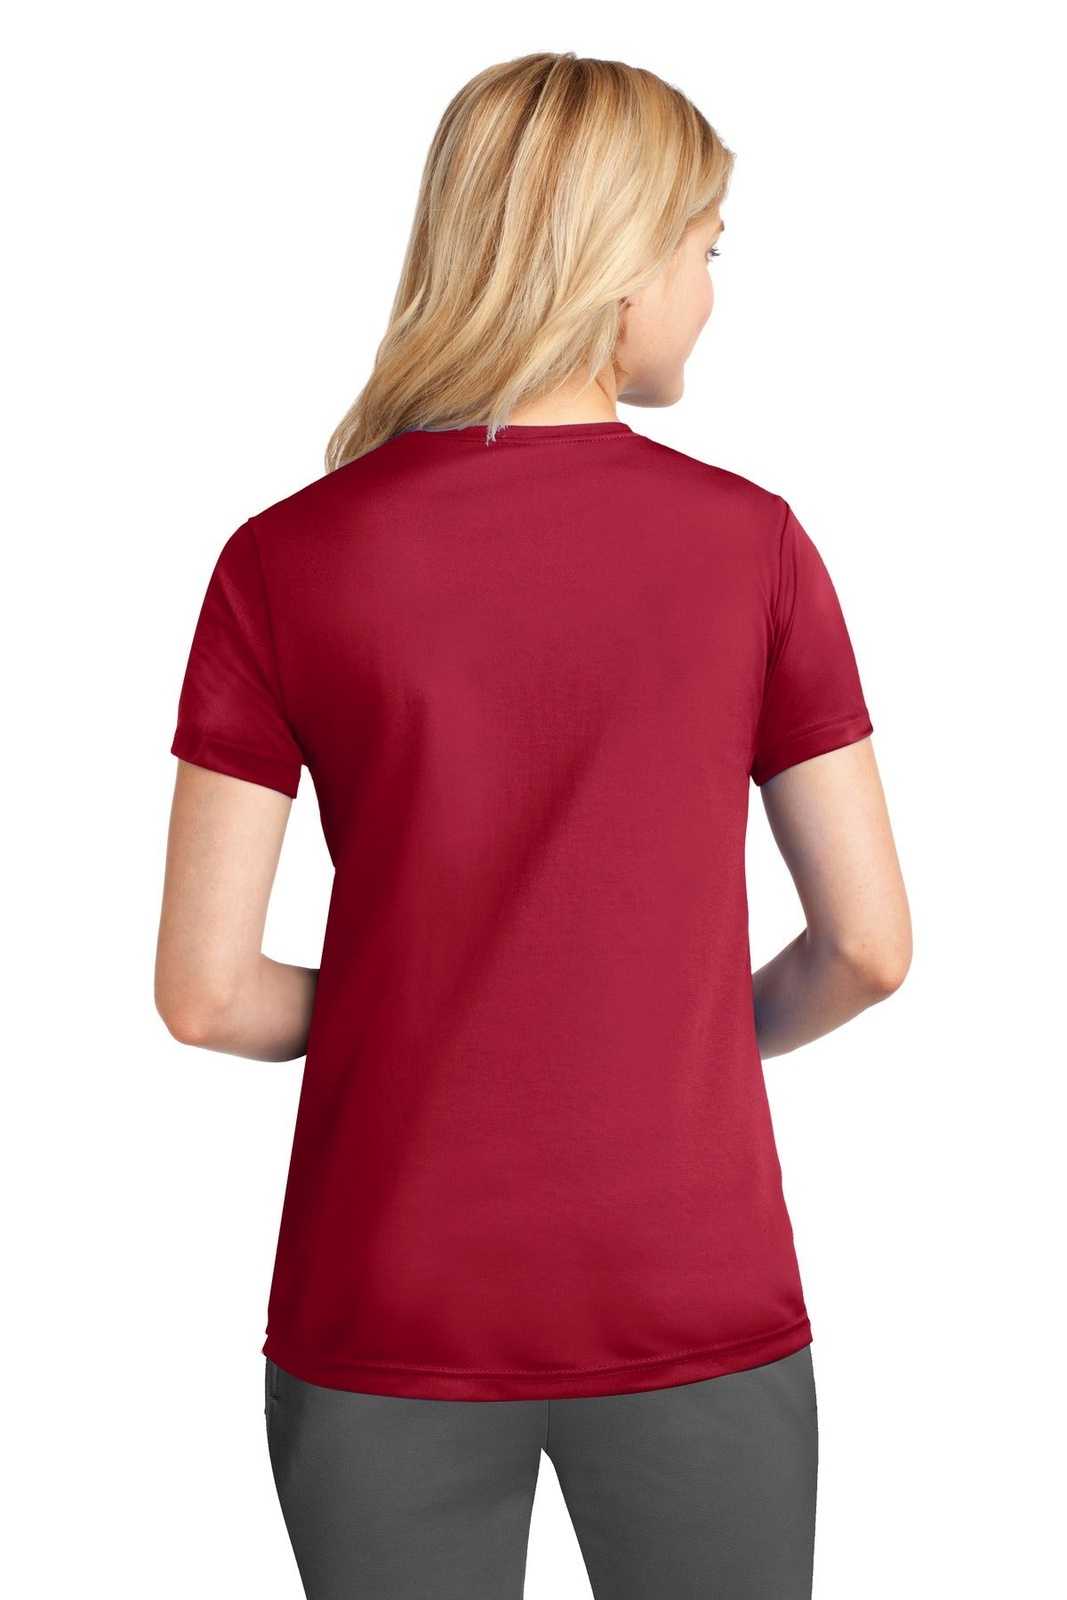 Port & Company LPC380 Ladies Performance Tee - Red - HIT a Double - 1